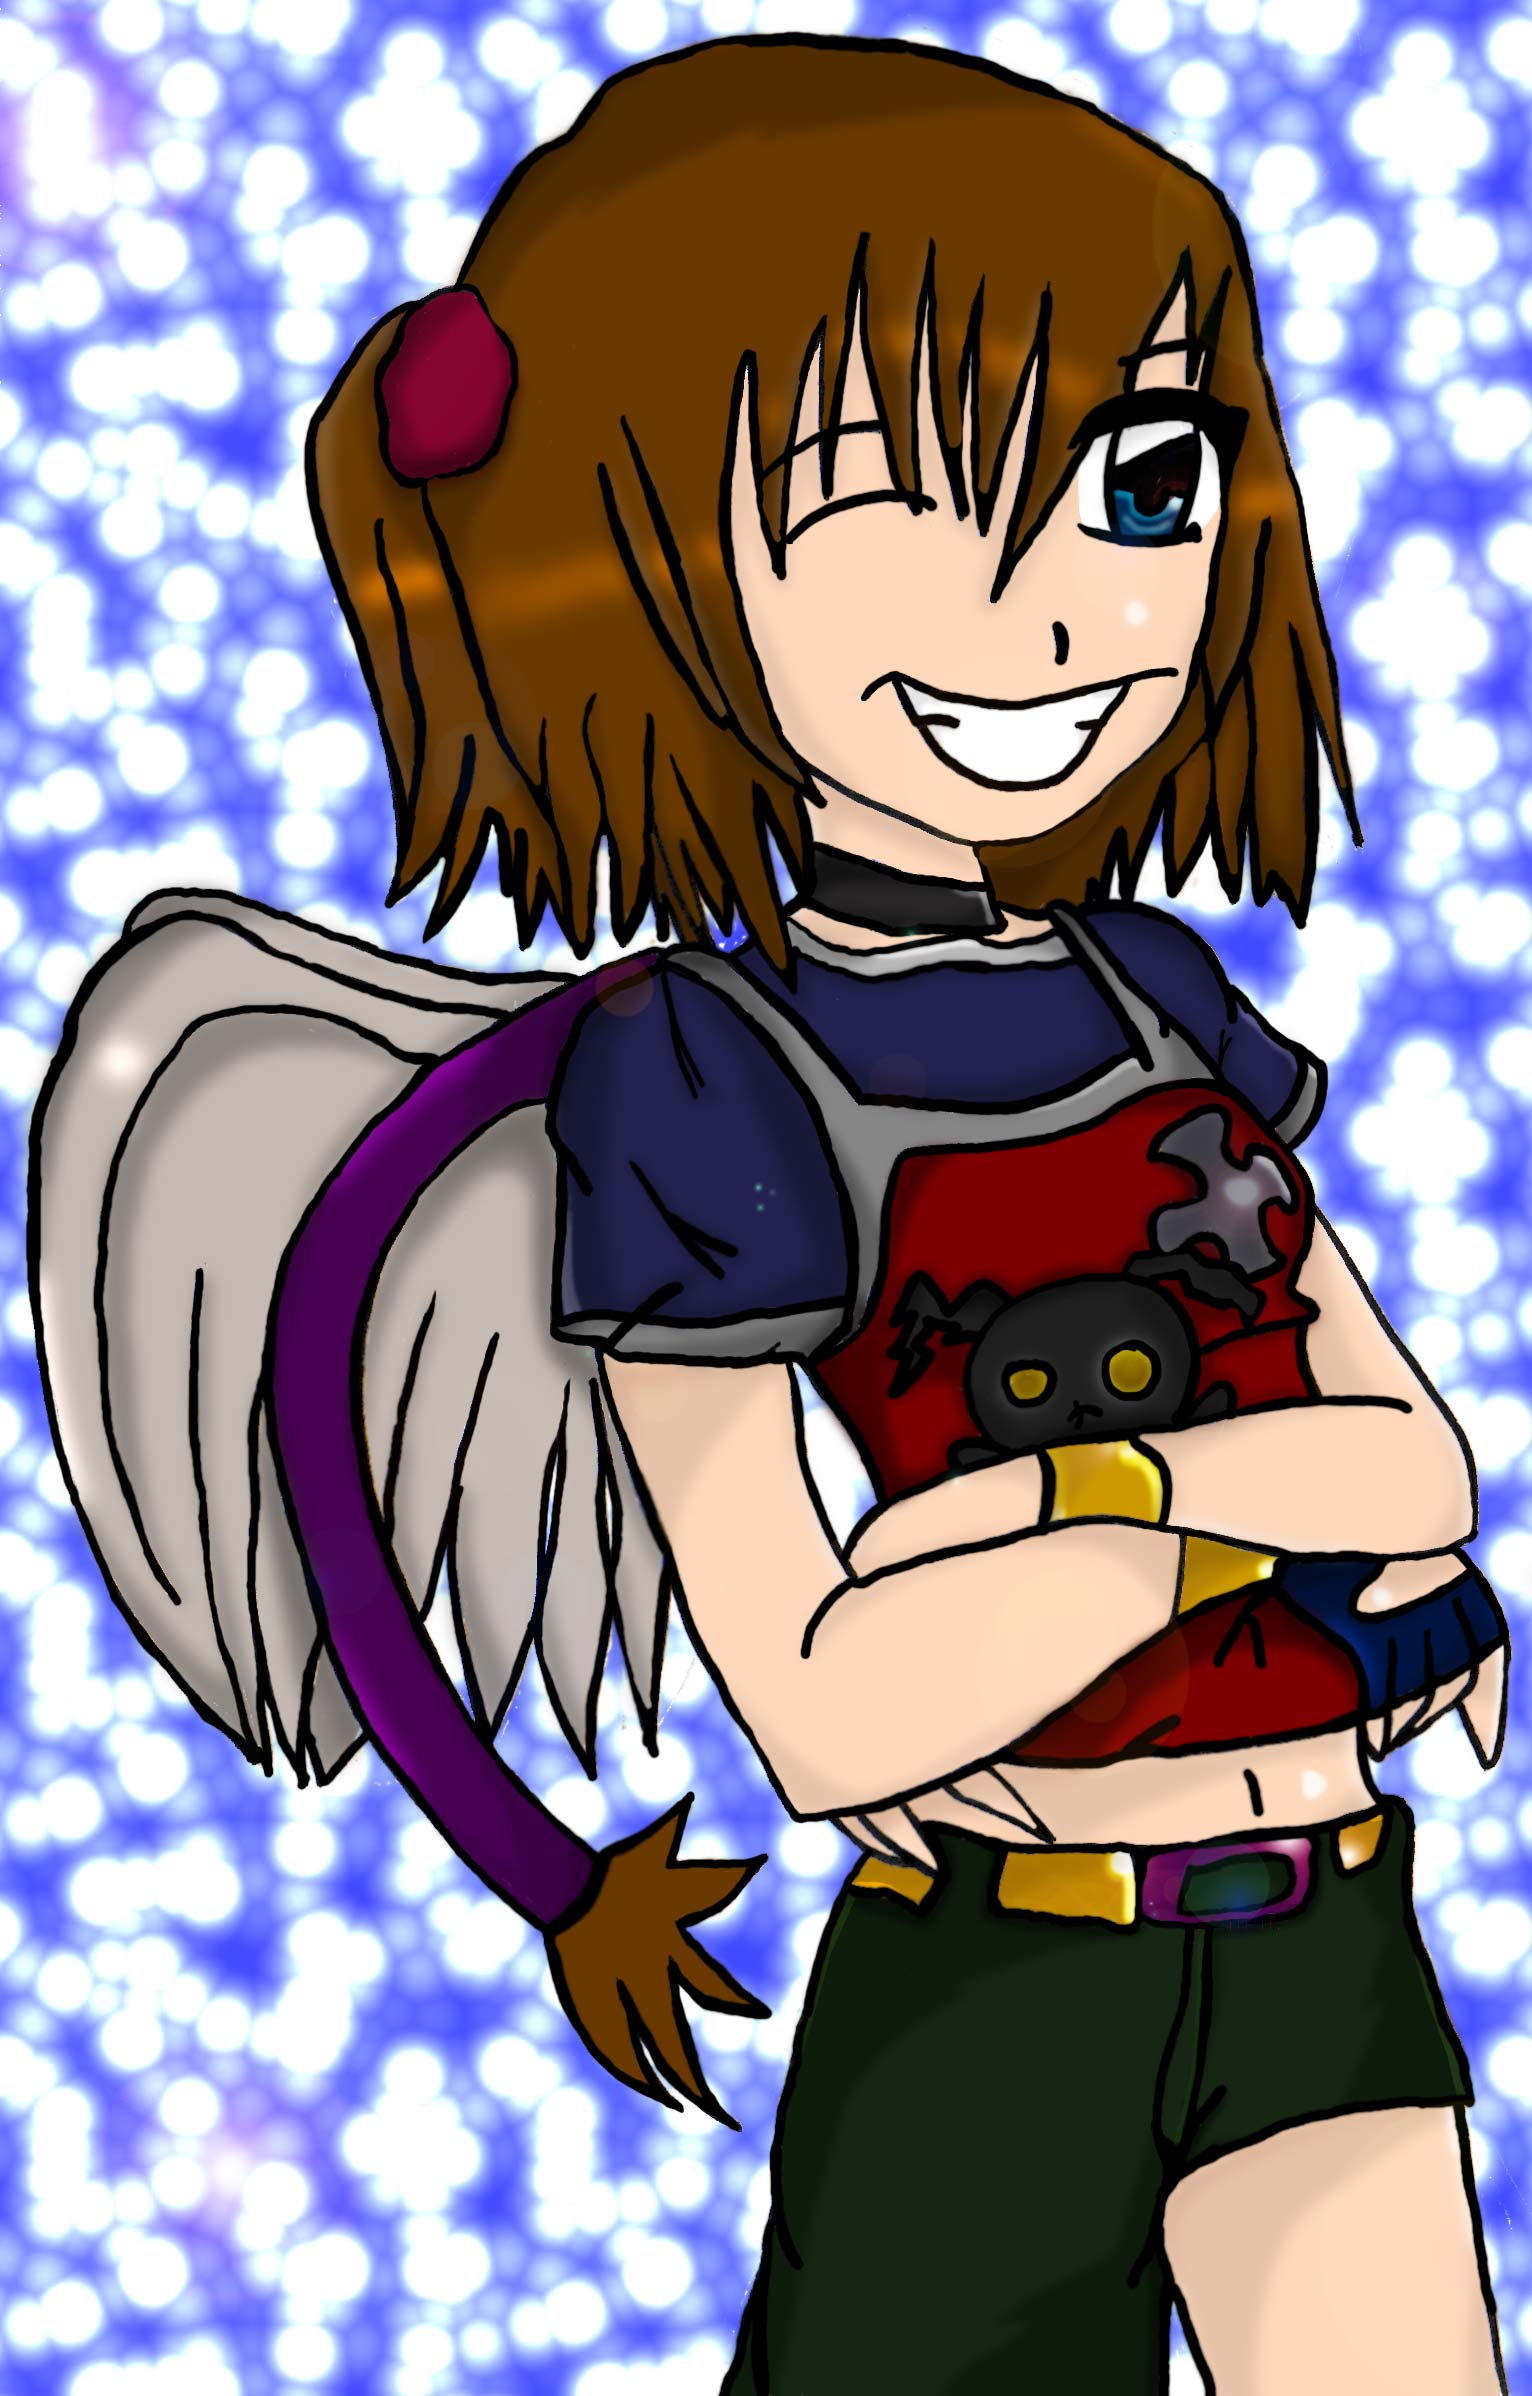 Ahaa me as a KH character by Chibigamergal